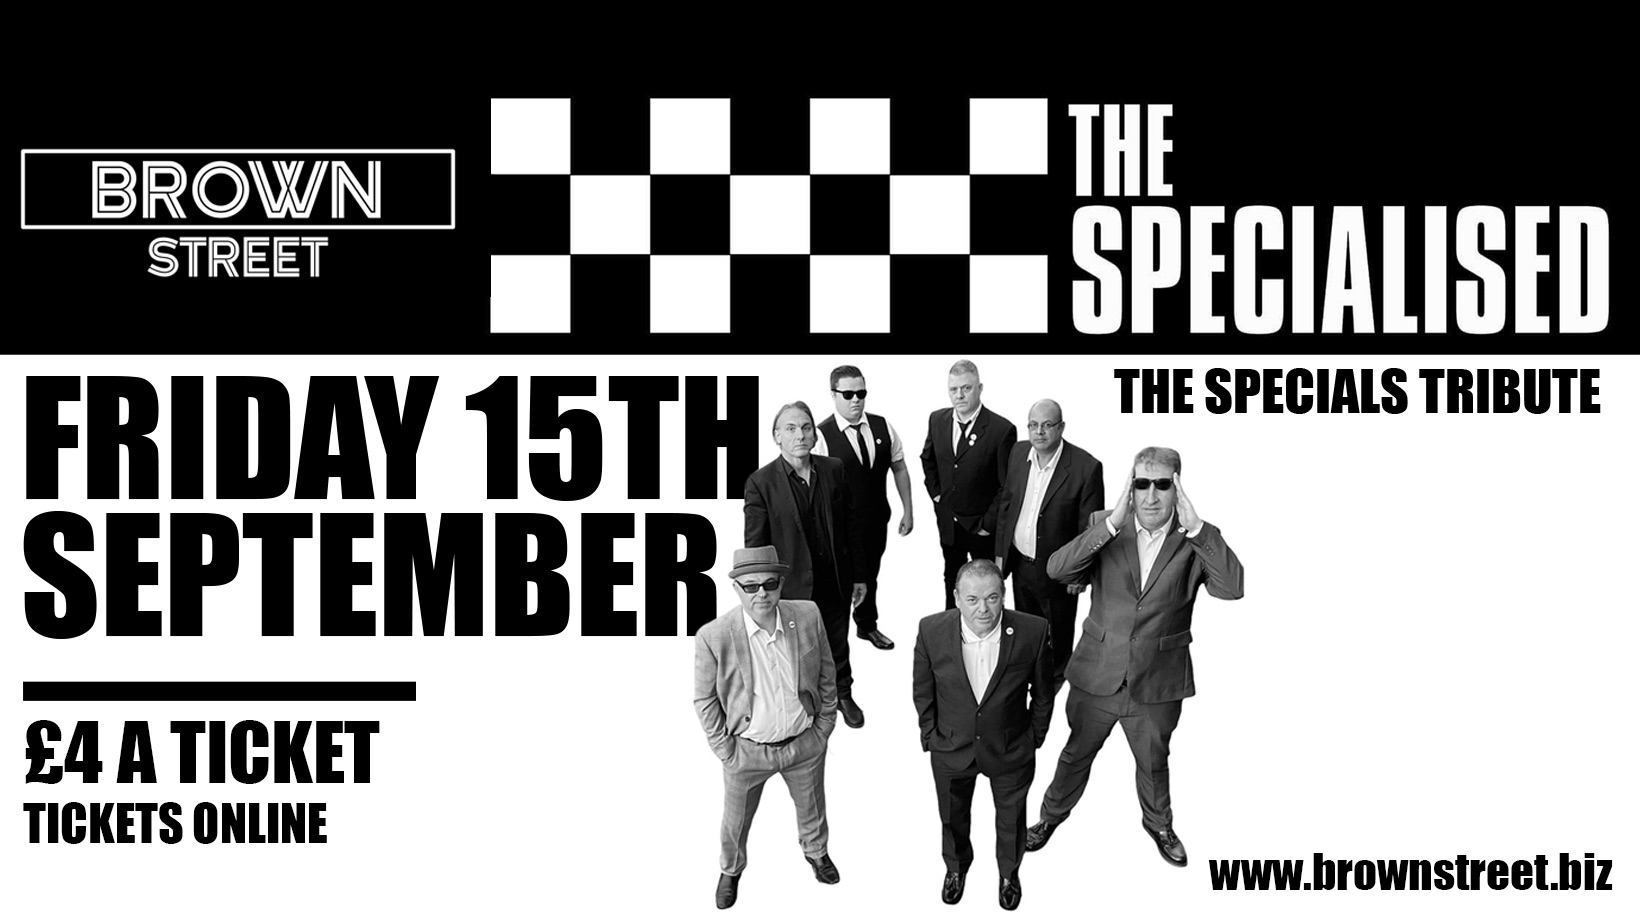 THE SPECIALISED - The Specials Tribute